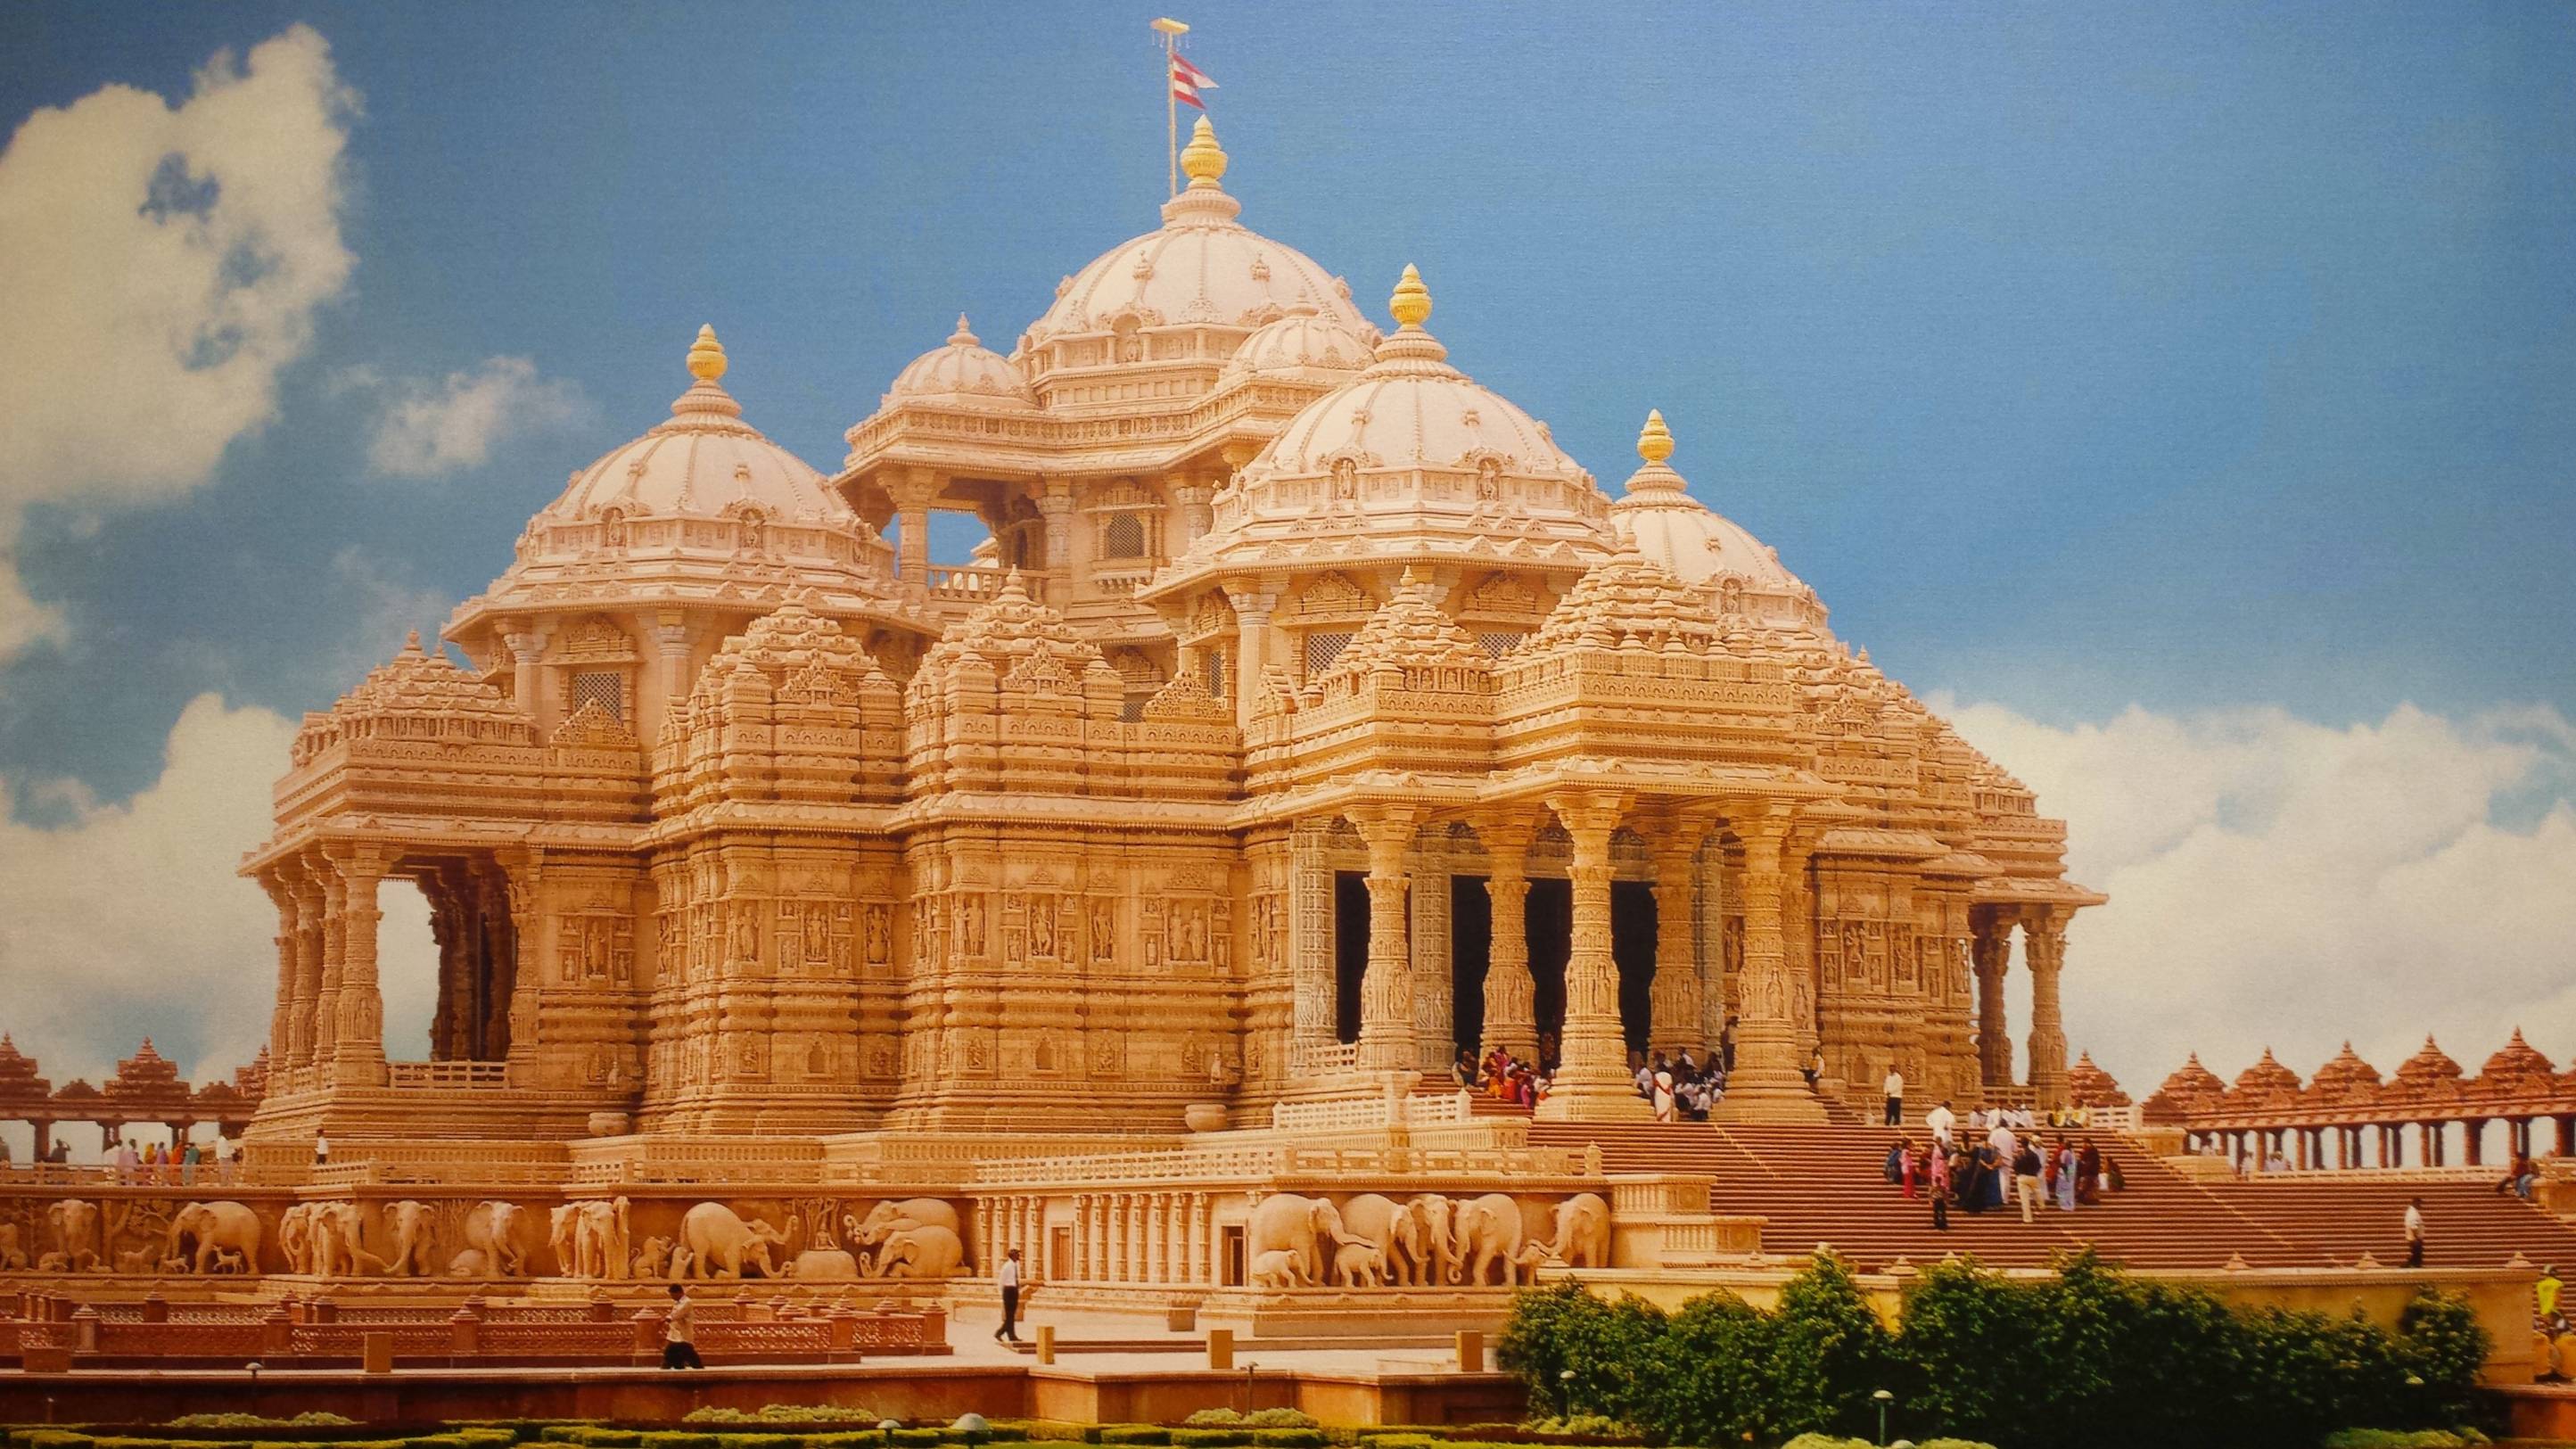 Delhi’s Akshardham temple to reopen from Oct 13 after months of lockdown